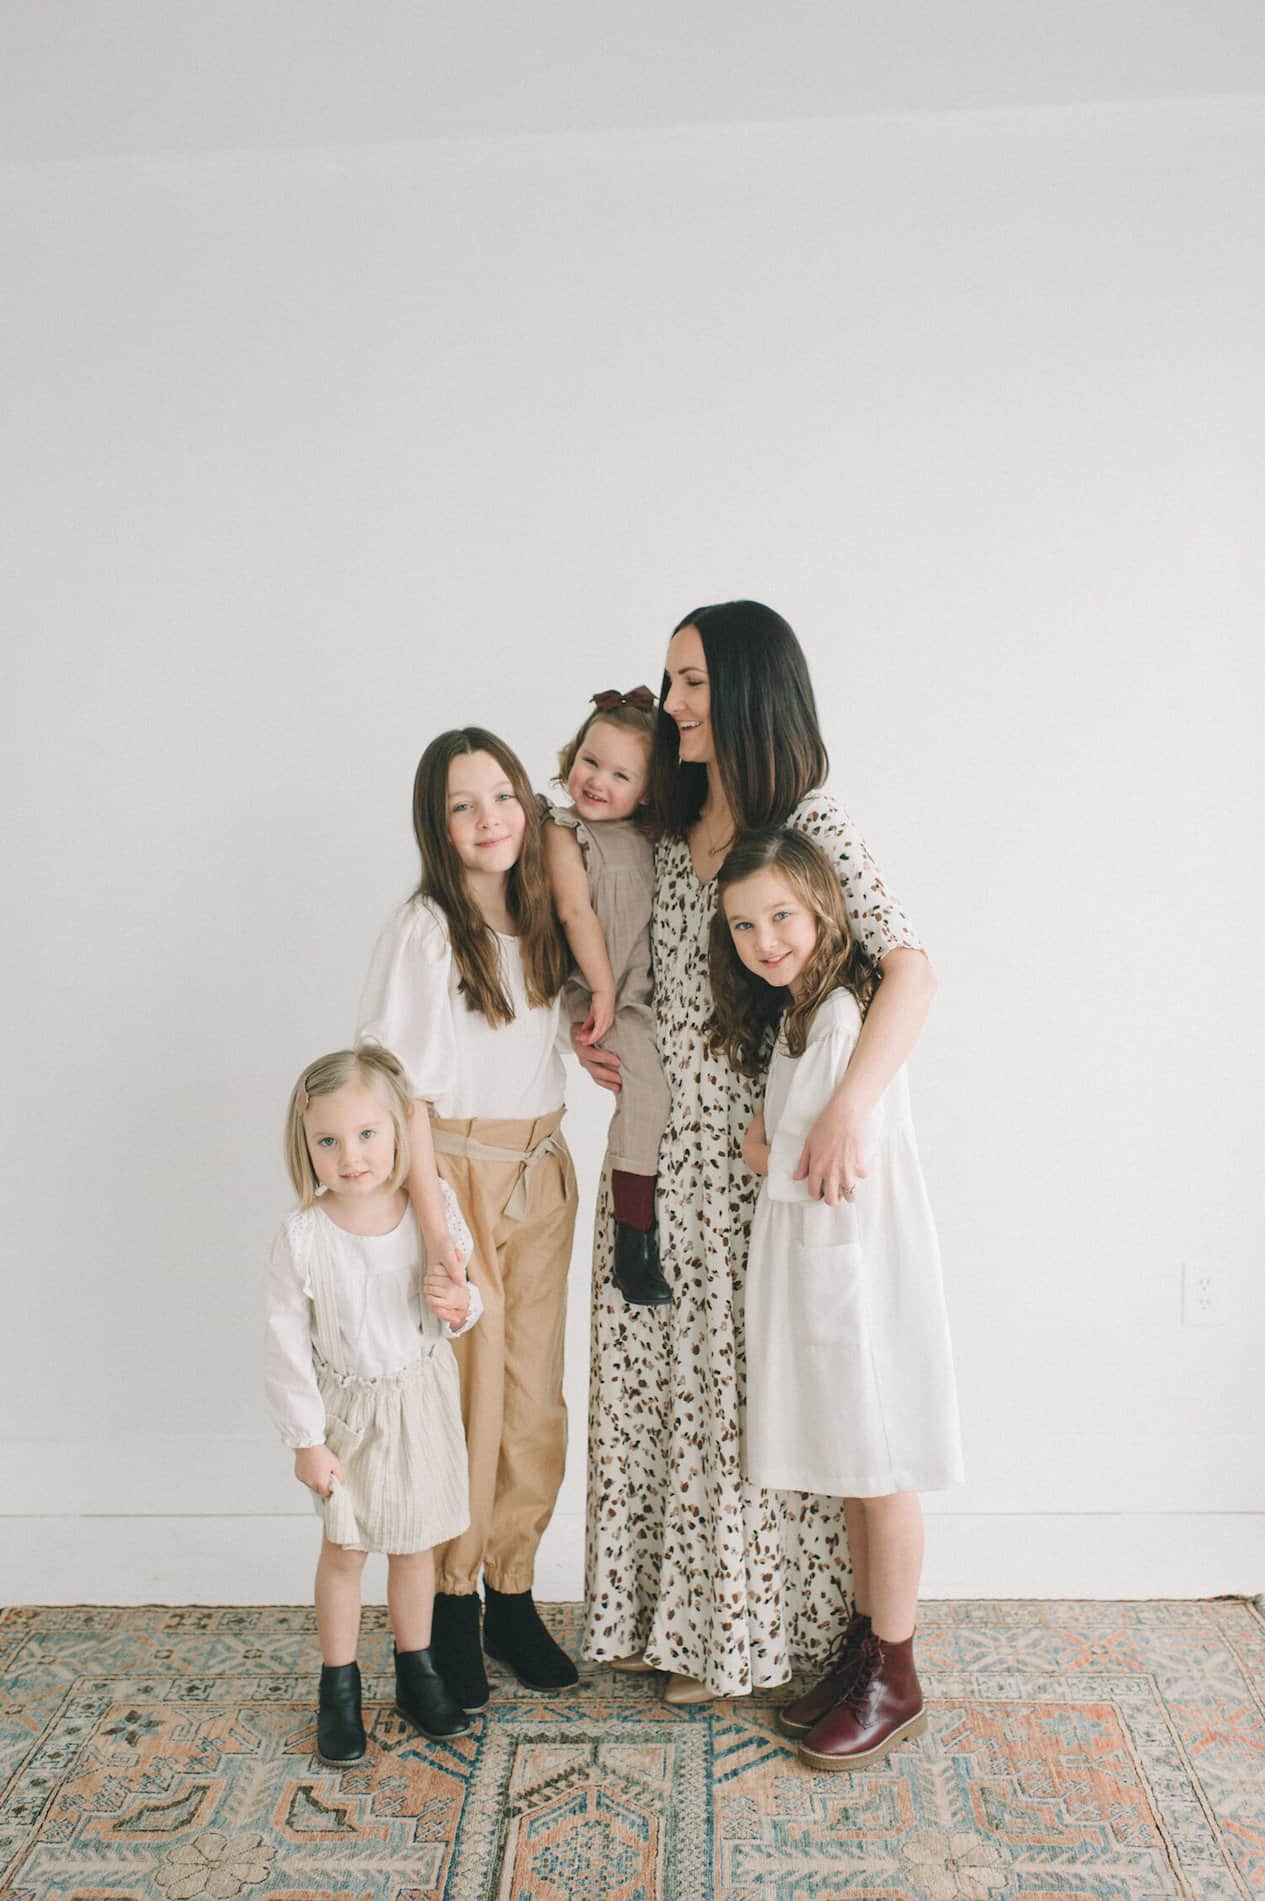 image of a mother and her four daughter standing in a white room on a vintage carpet wearing neutral clothes for a photoshoot